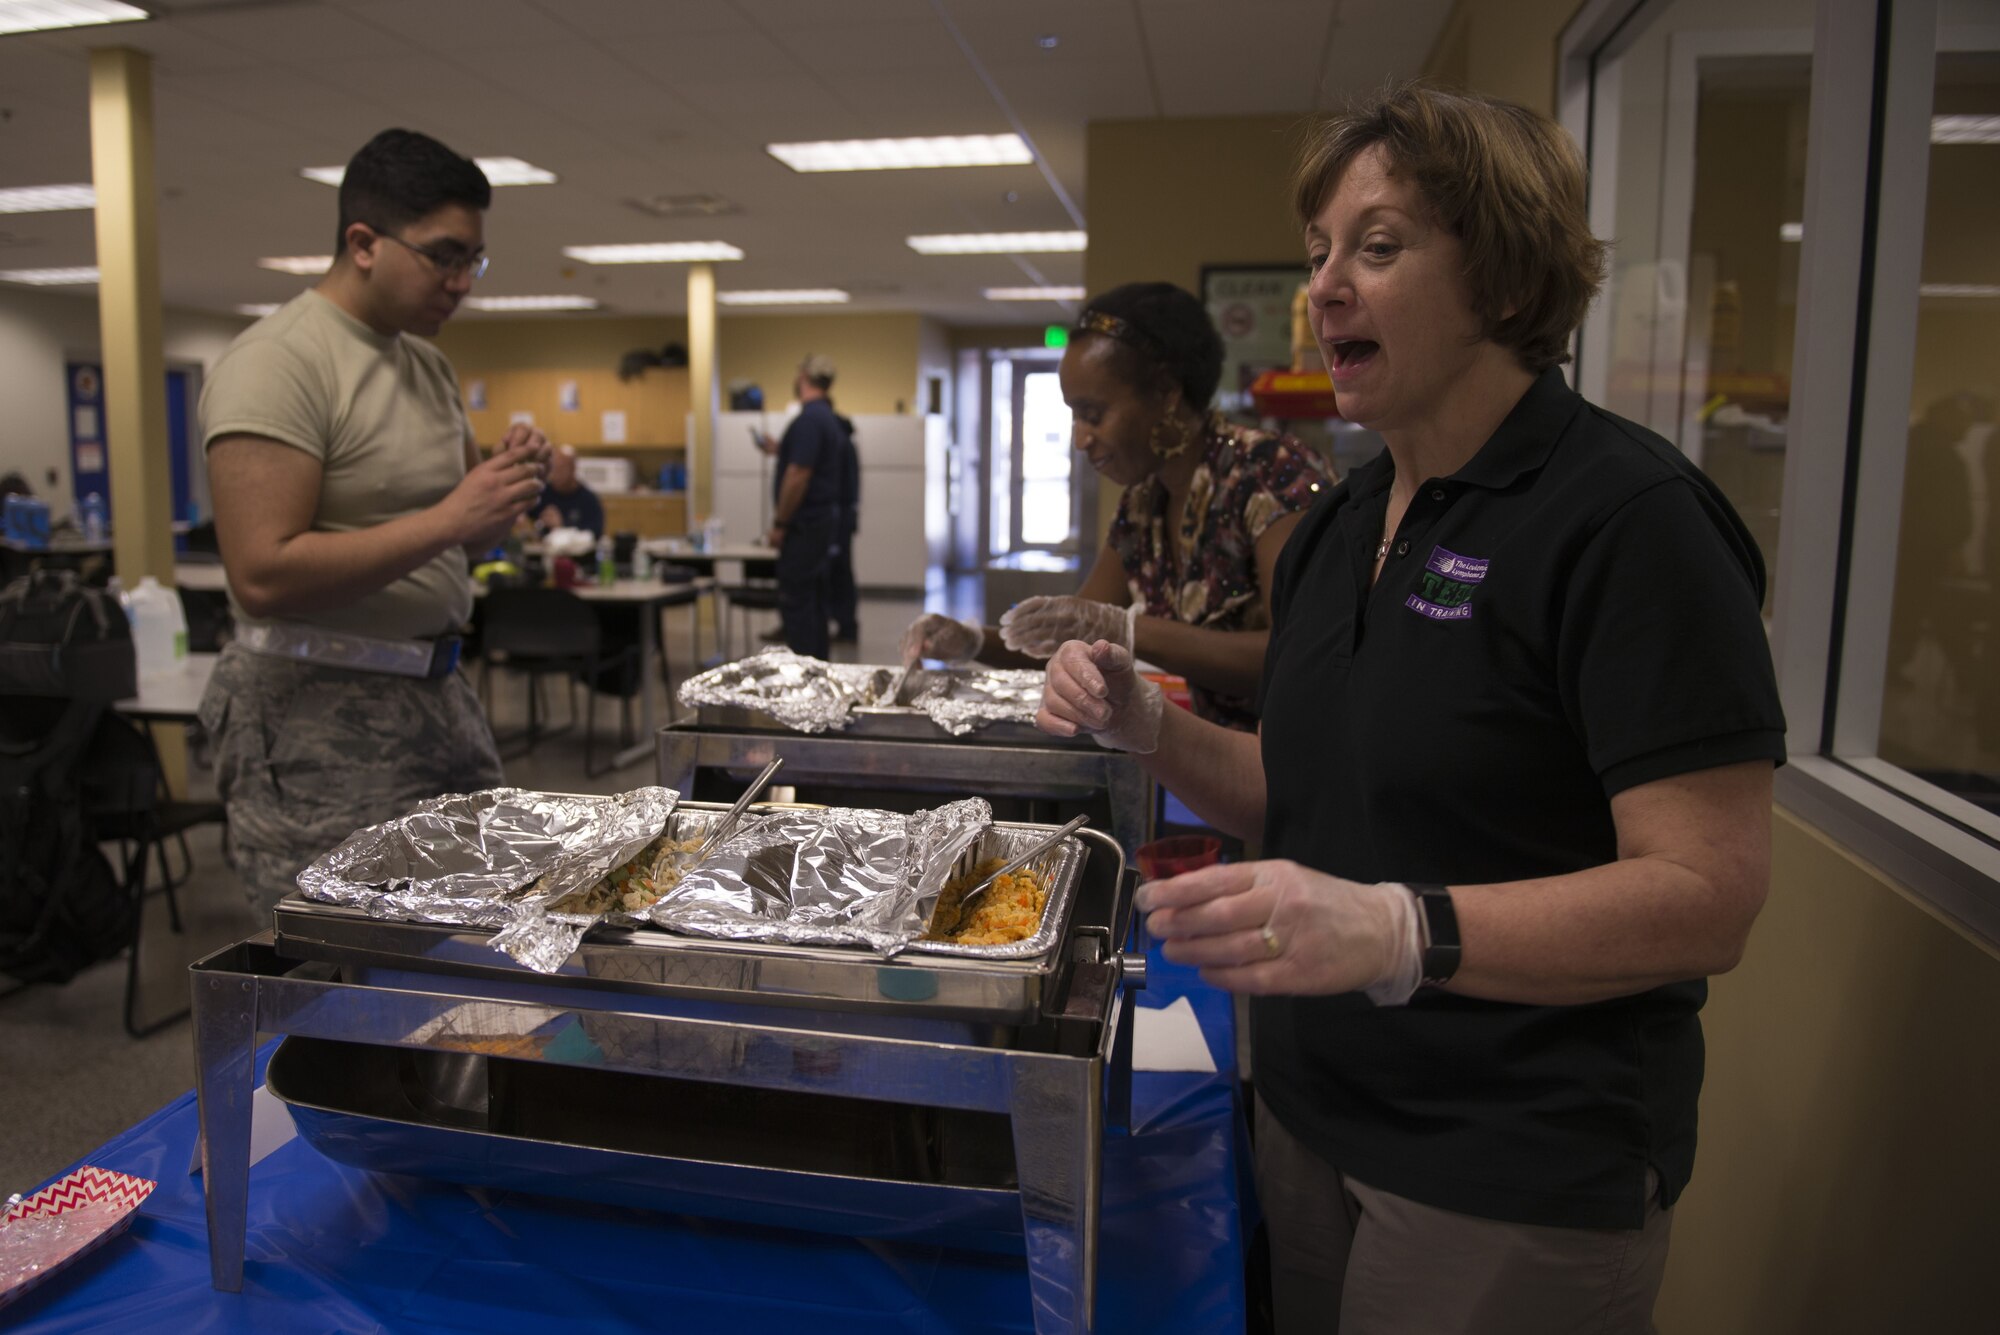 Deb Robinson, 56th Medical Group dietician, serves healthy entree samples as part of a taste test to members of the 62nd Aircraft Maintenance Unit Jan. 18, 2018, at Luke Air Force Base. Robinson, also known as "Diet Deb," is leading an initiative to change food and snack choices at unit snackbars to be healthier and more nutritious without sacrificing flavor. (U.S. Air Force photo/Senior Airman Ridge Shan)